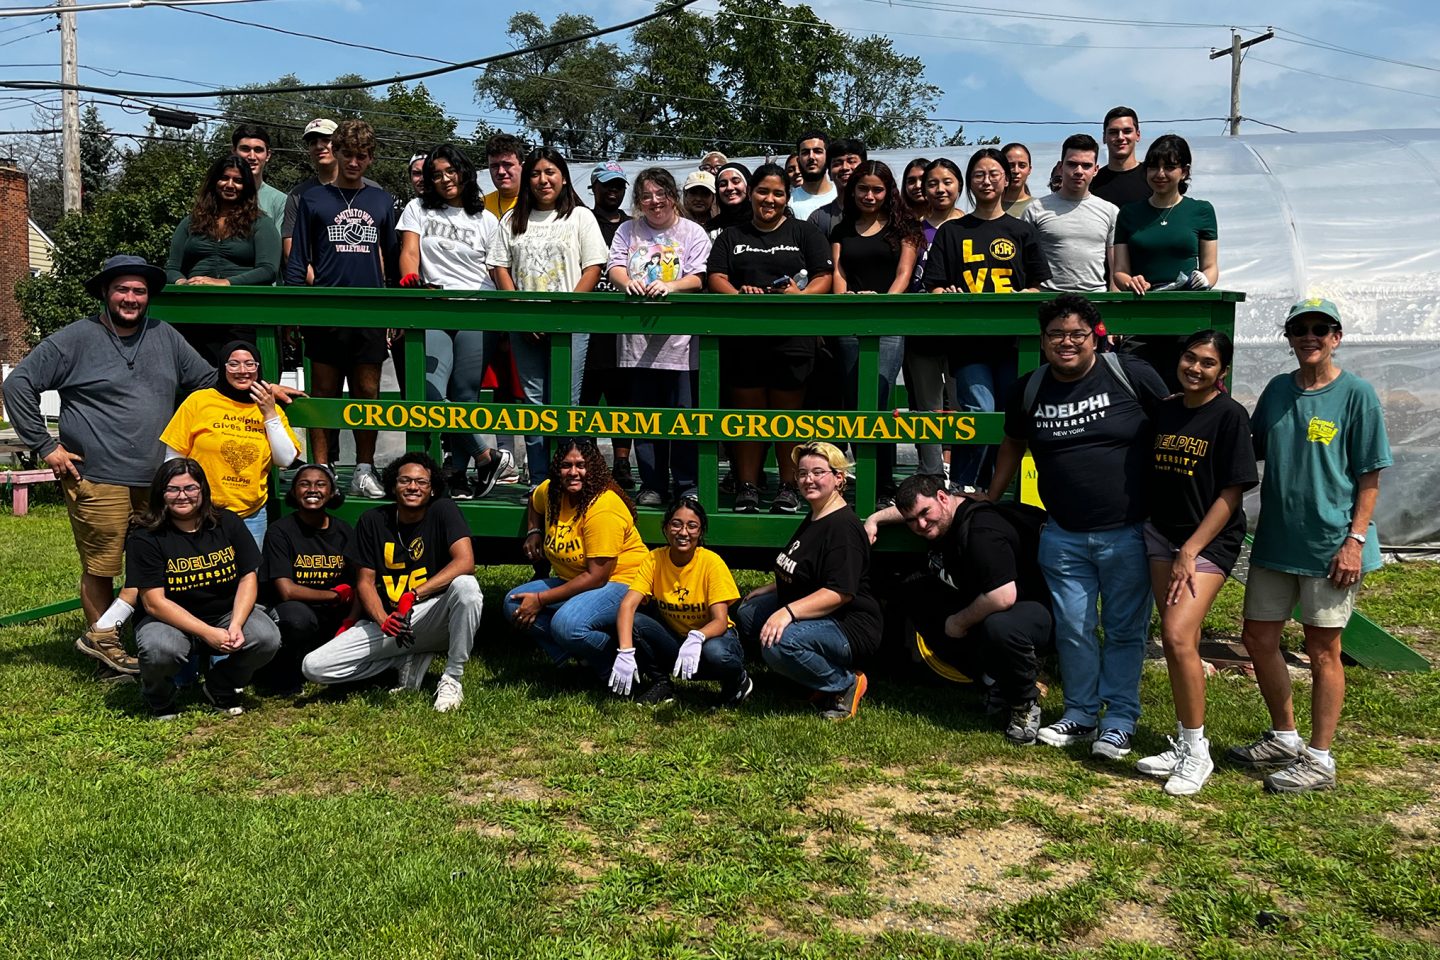 FCAP students at Crossroad Farms. Crossroad Farms is one of the closest organic farms to New York City. Our students assisted with harvesting crops, seeds, and weeding.